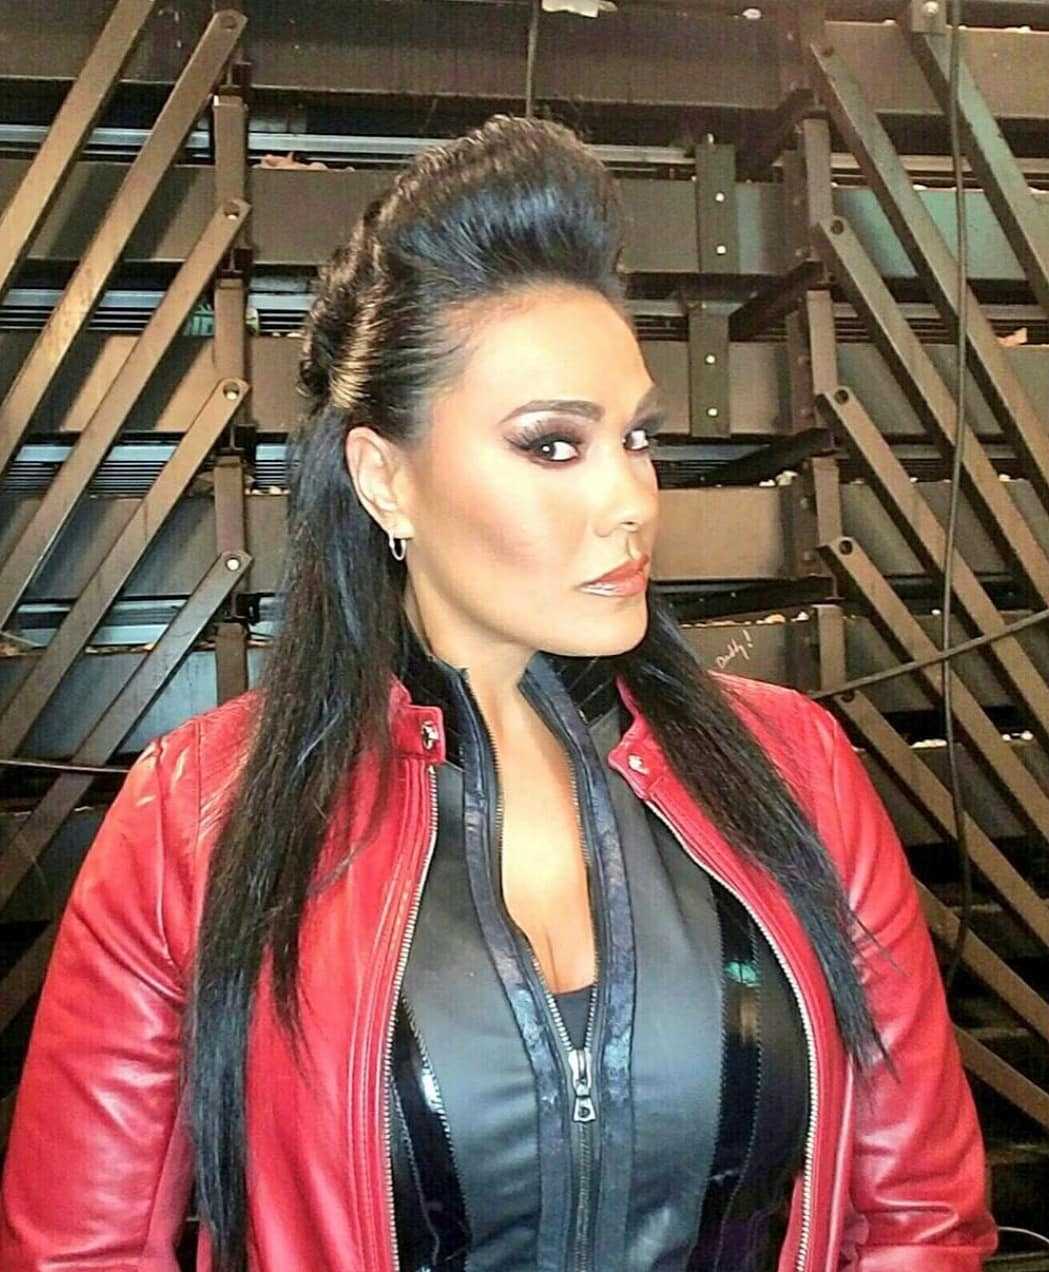 55+ Sexy Tamina Snuka Boobs Pictures That Are Essentially Perfect | Best Of Comic Books